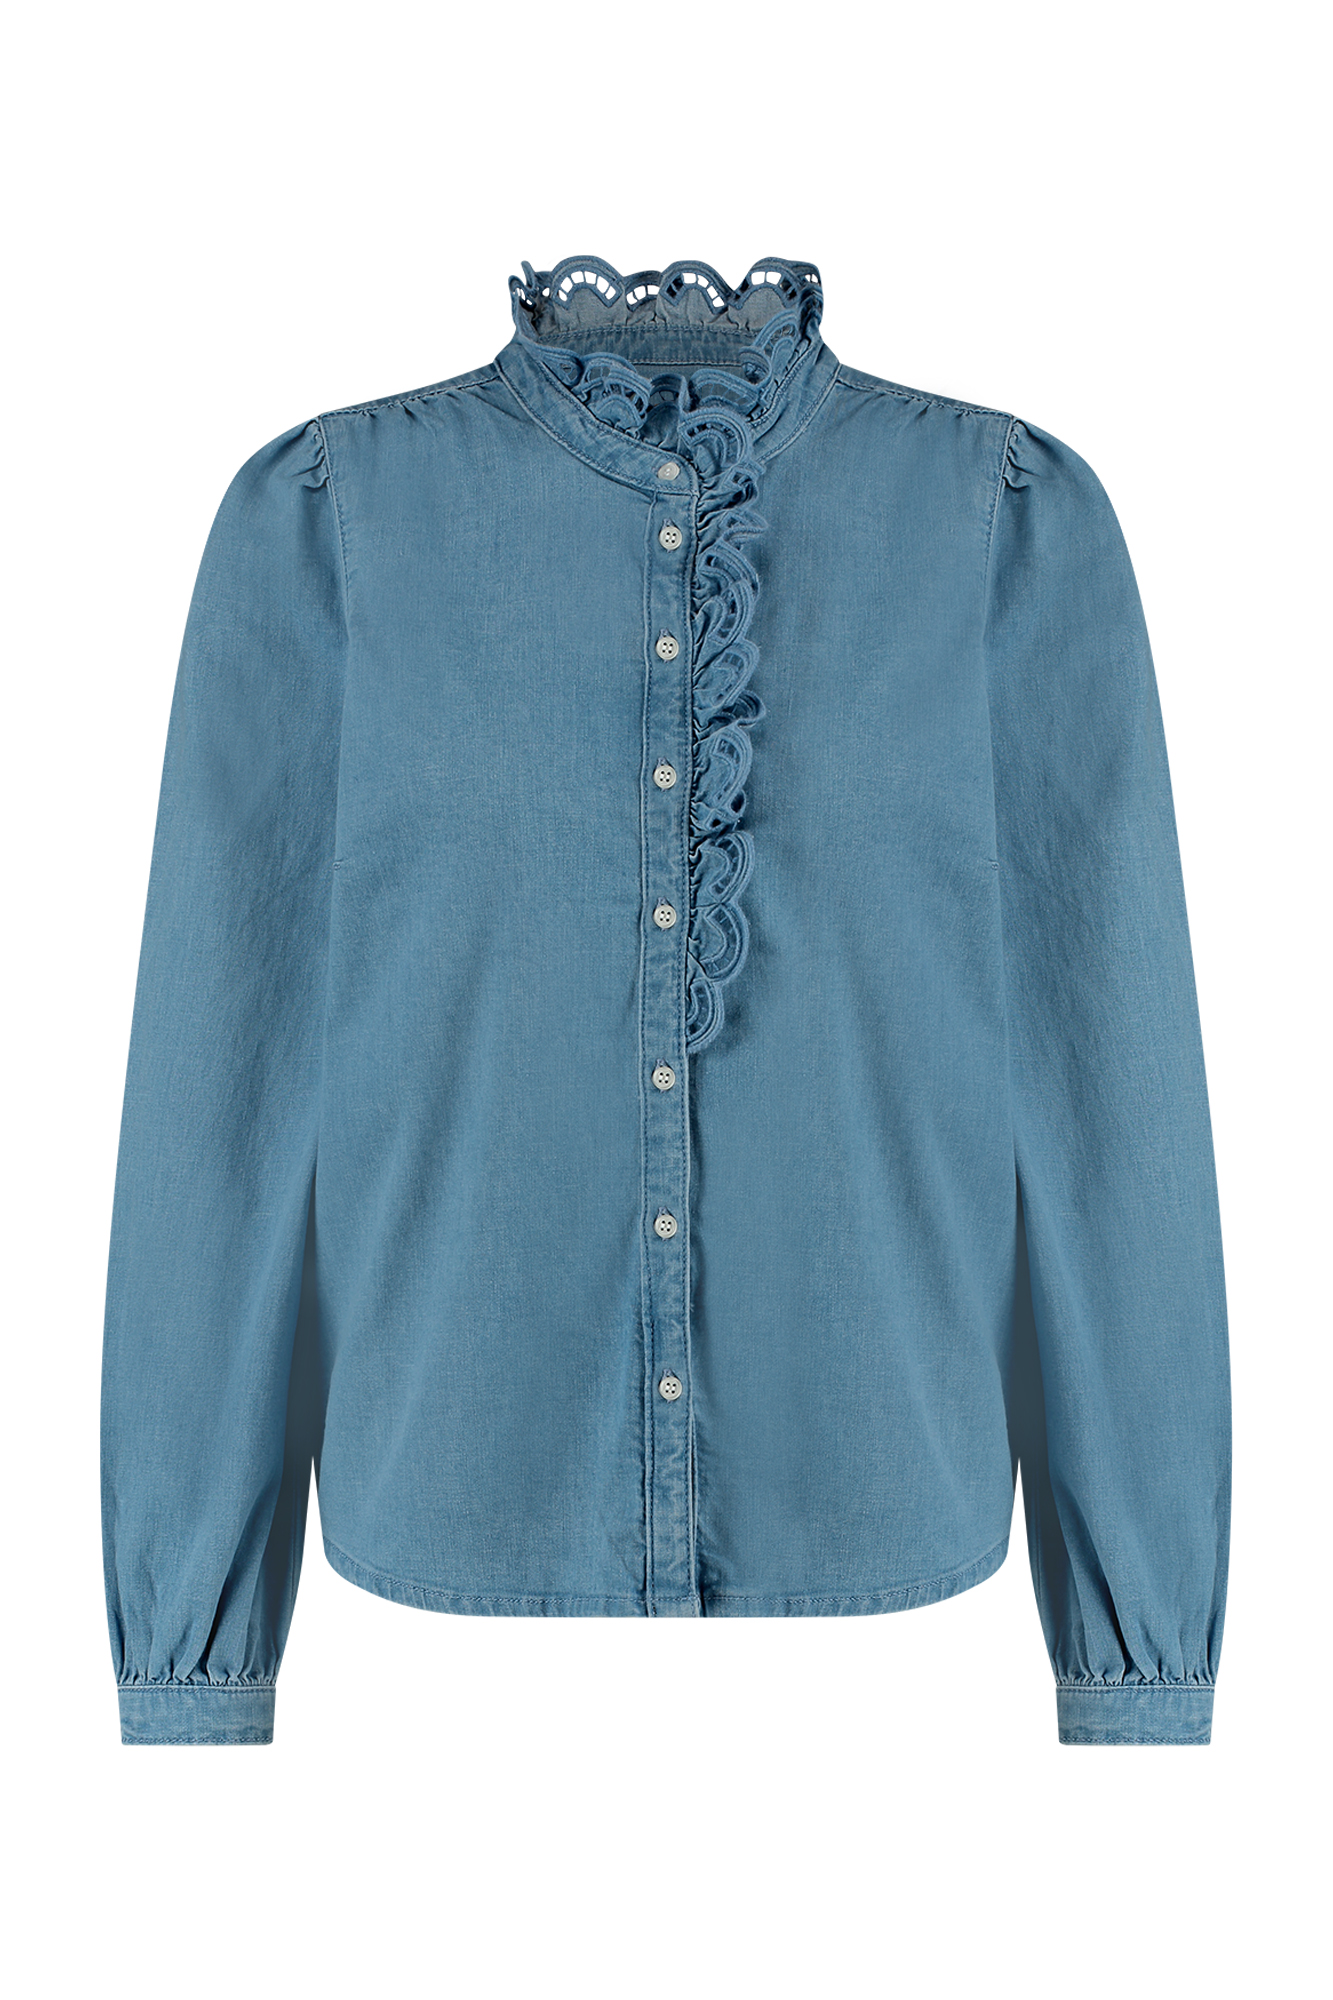 Studio Anneloes Lia Jeans Broderie Blouse Mid Jeans